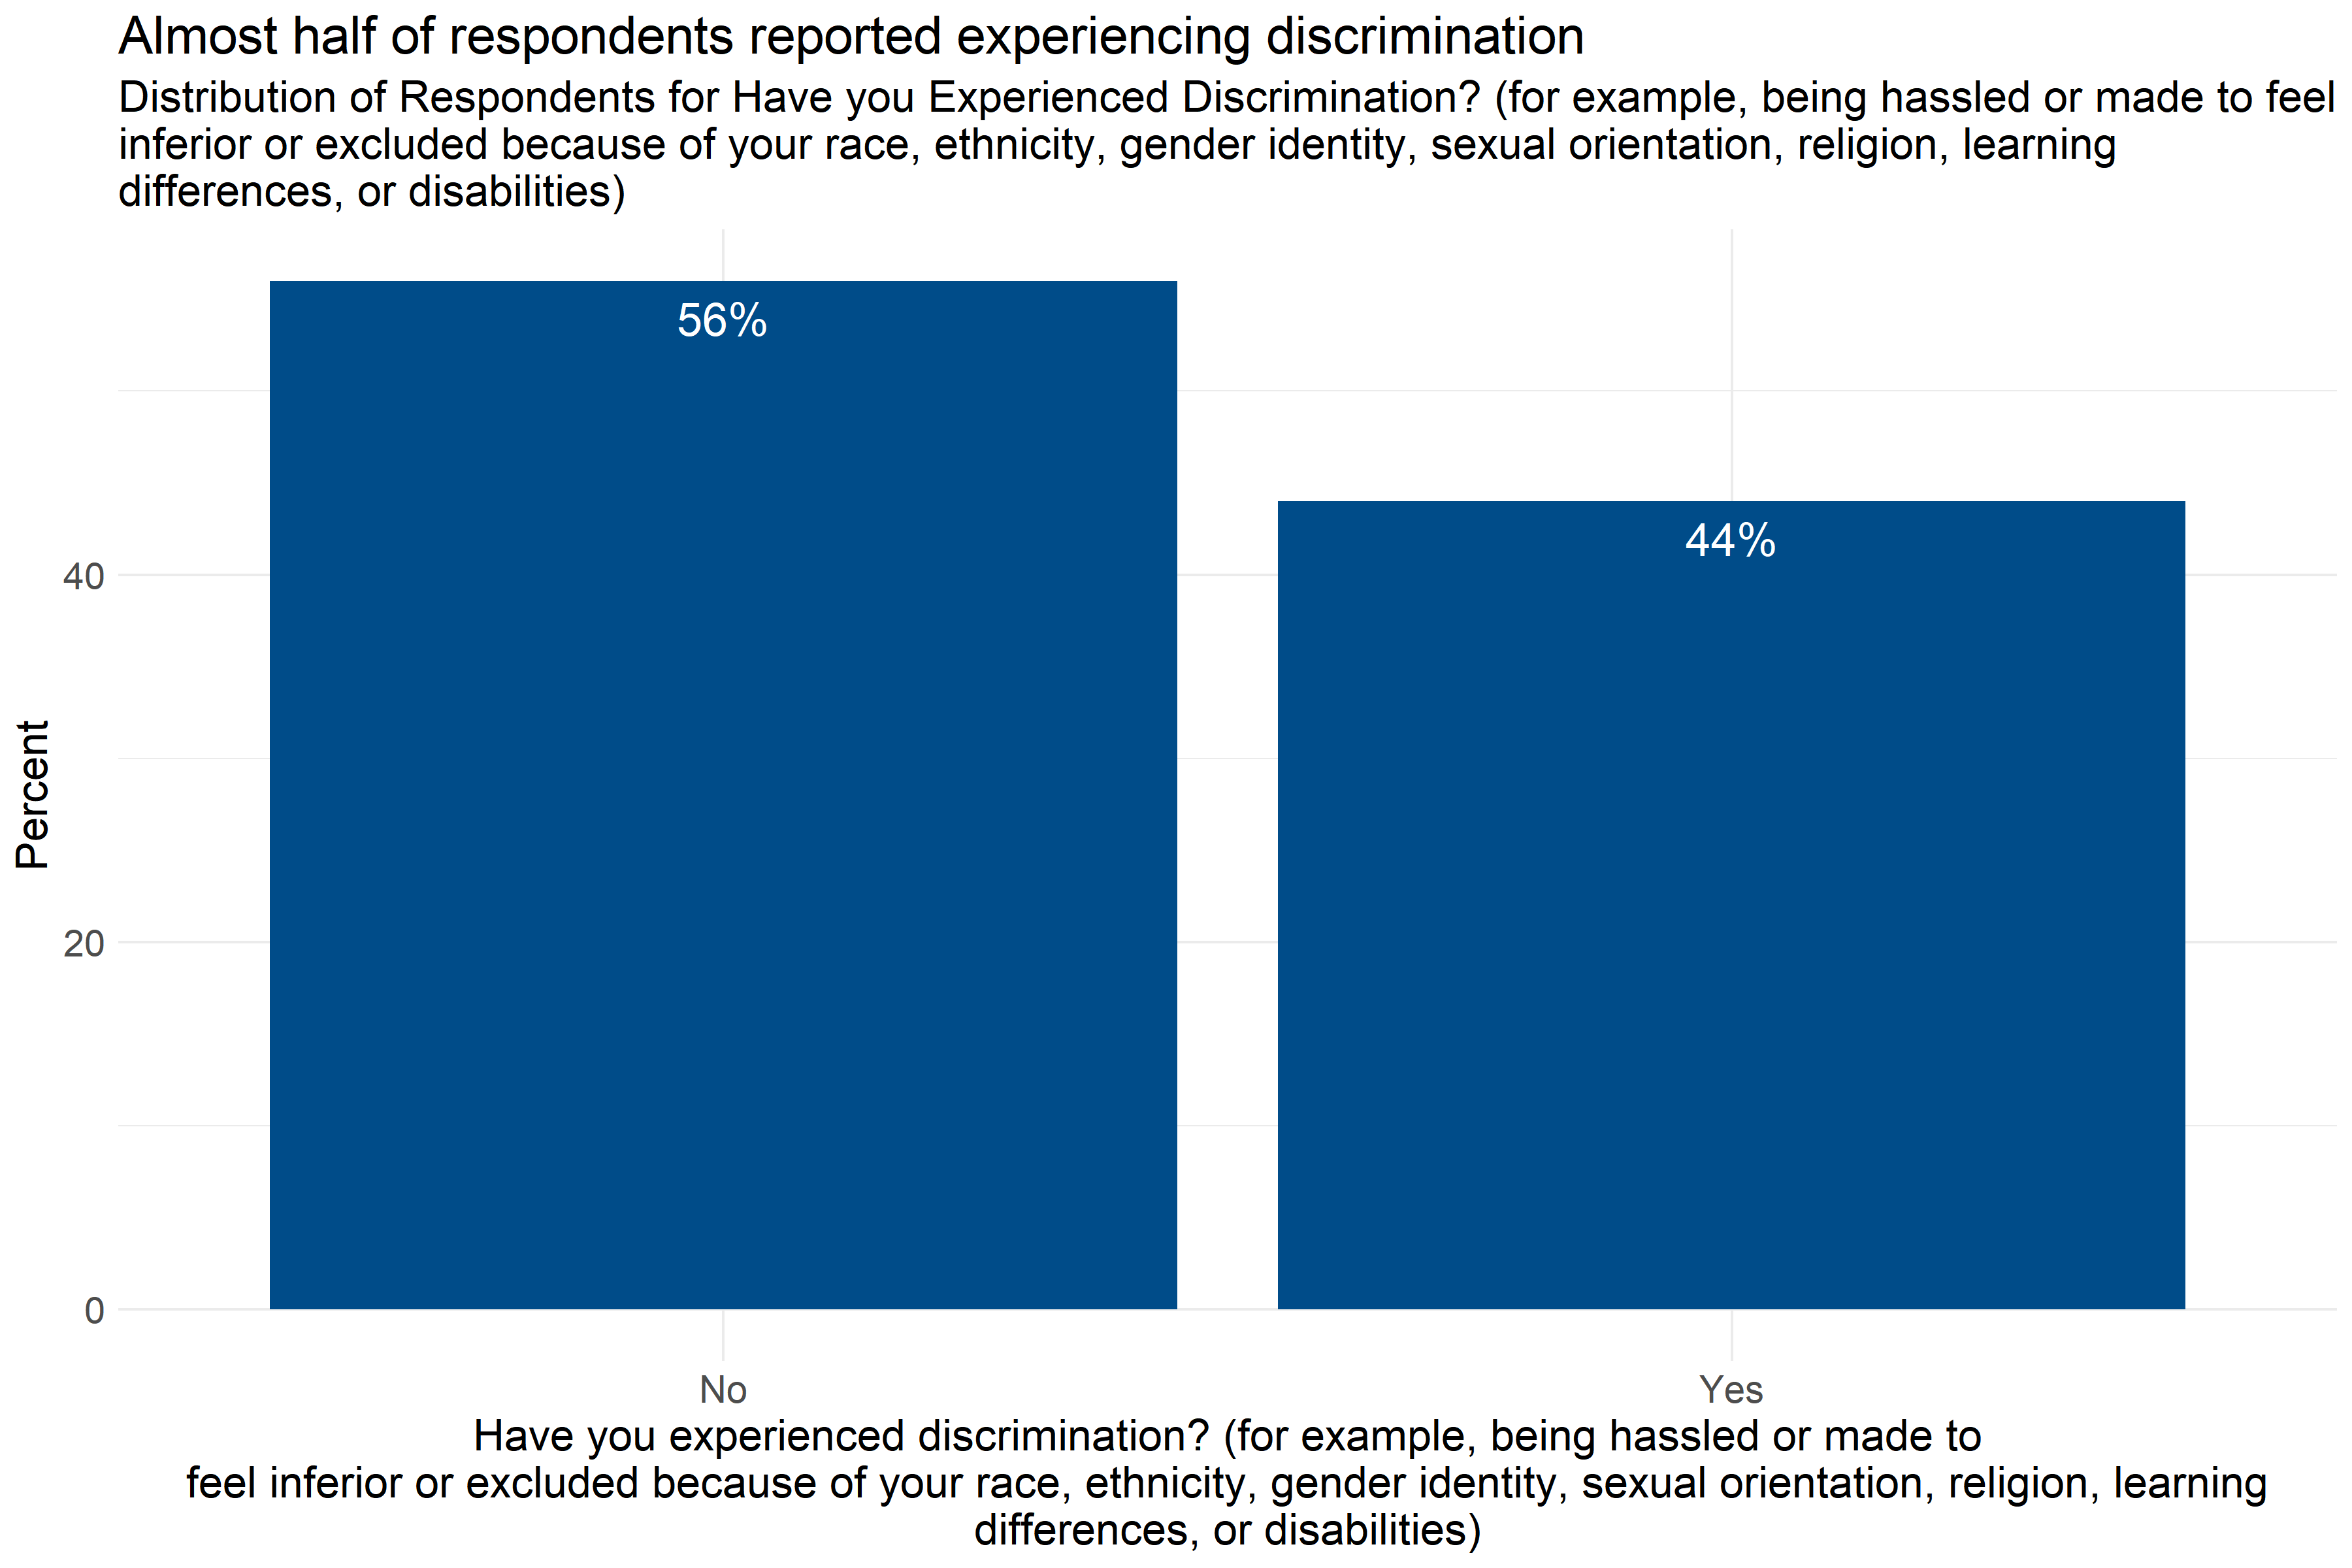 Percentage of respondents reporting experiences of discrimination